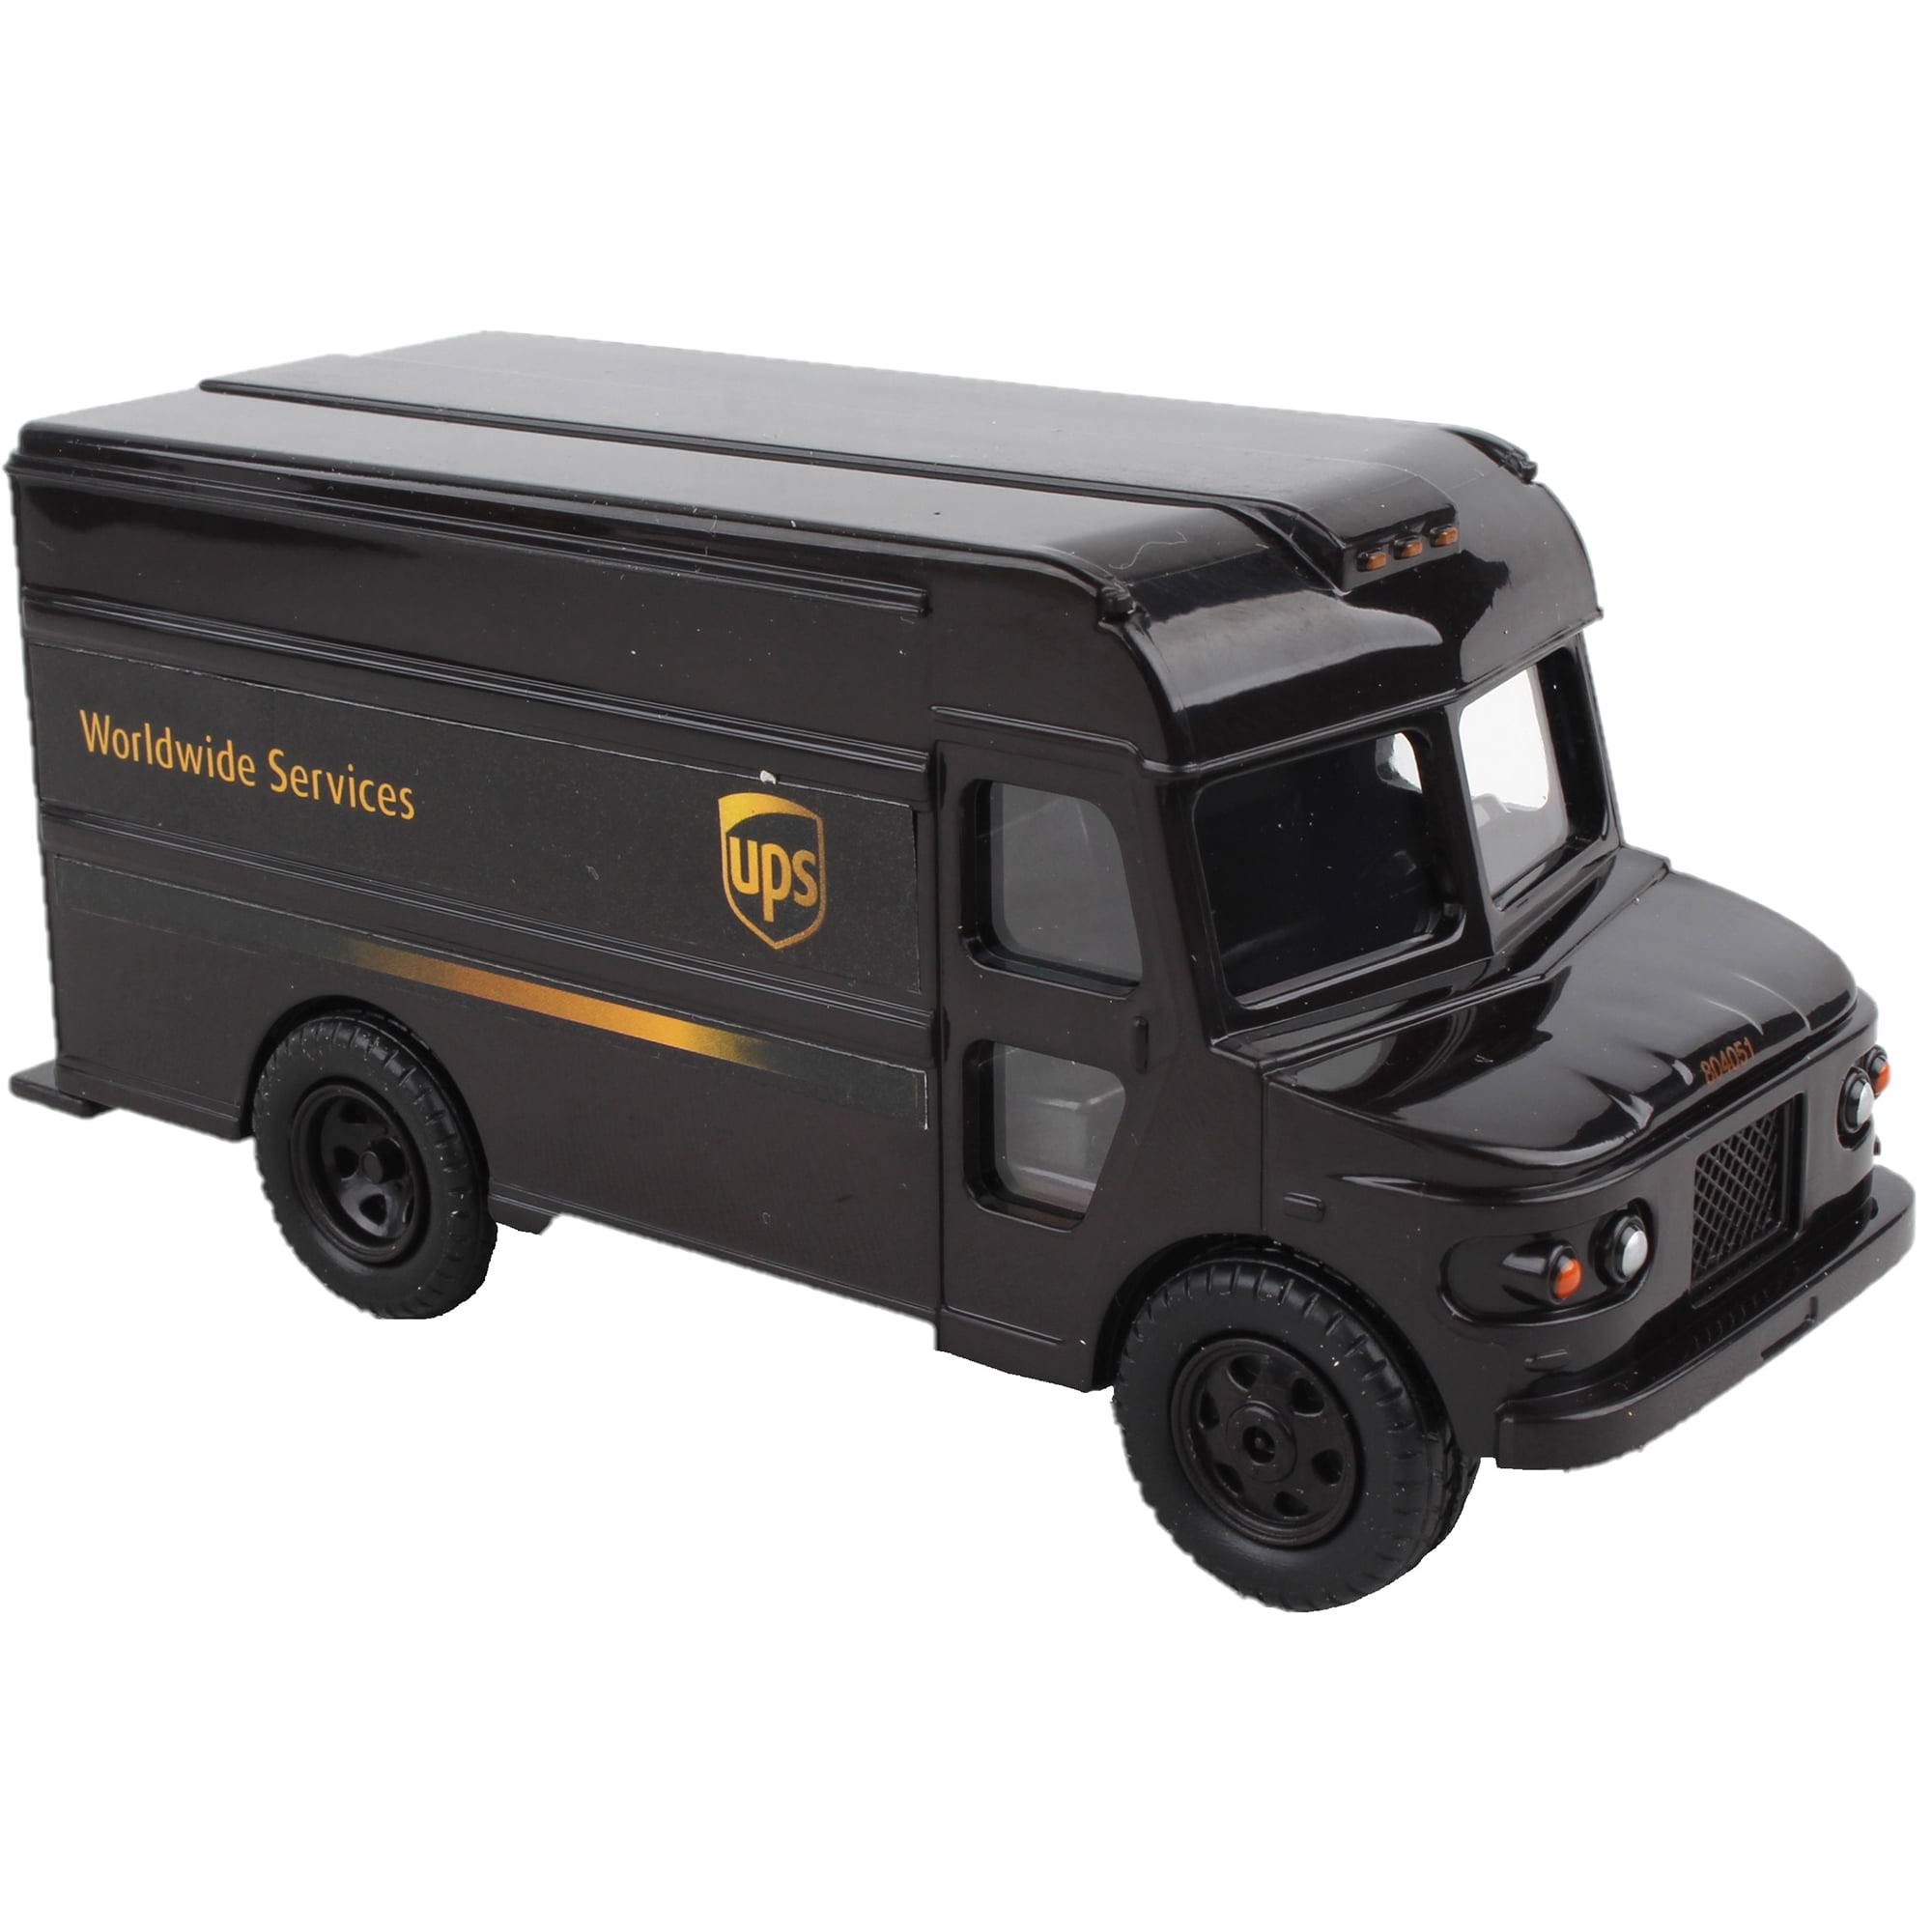 Daron Rt4349 Ups Pullback Package Car